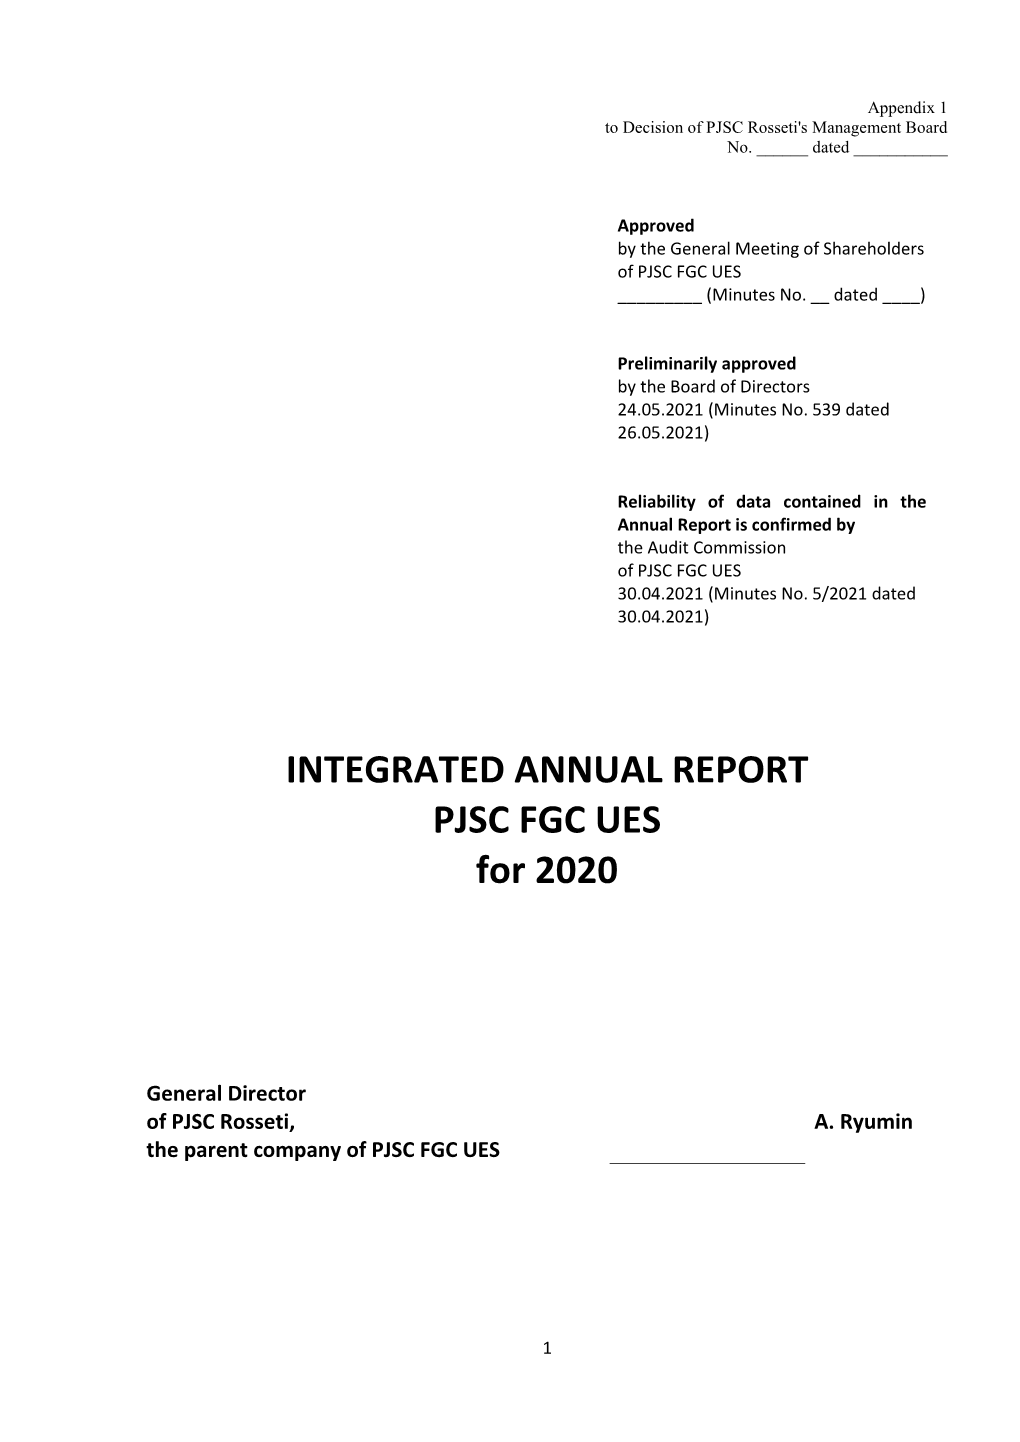 INTEGRATED ANNUAL REPORT PJSC FGC UES for 2020